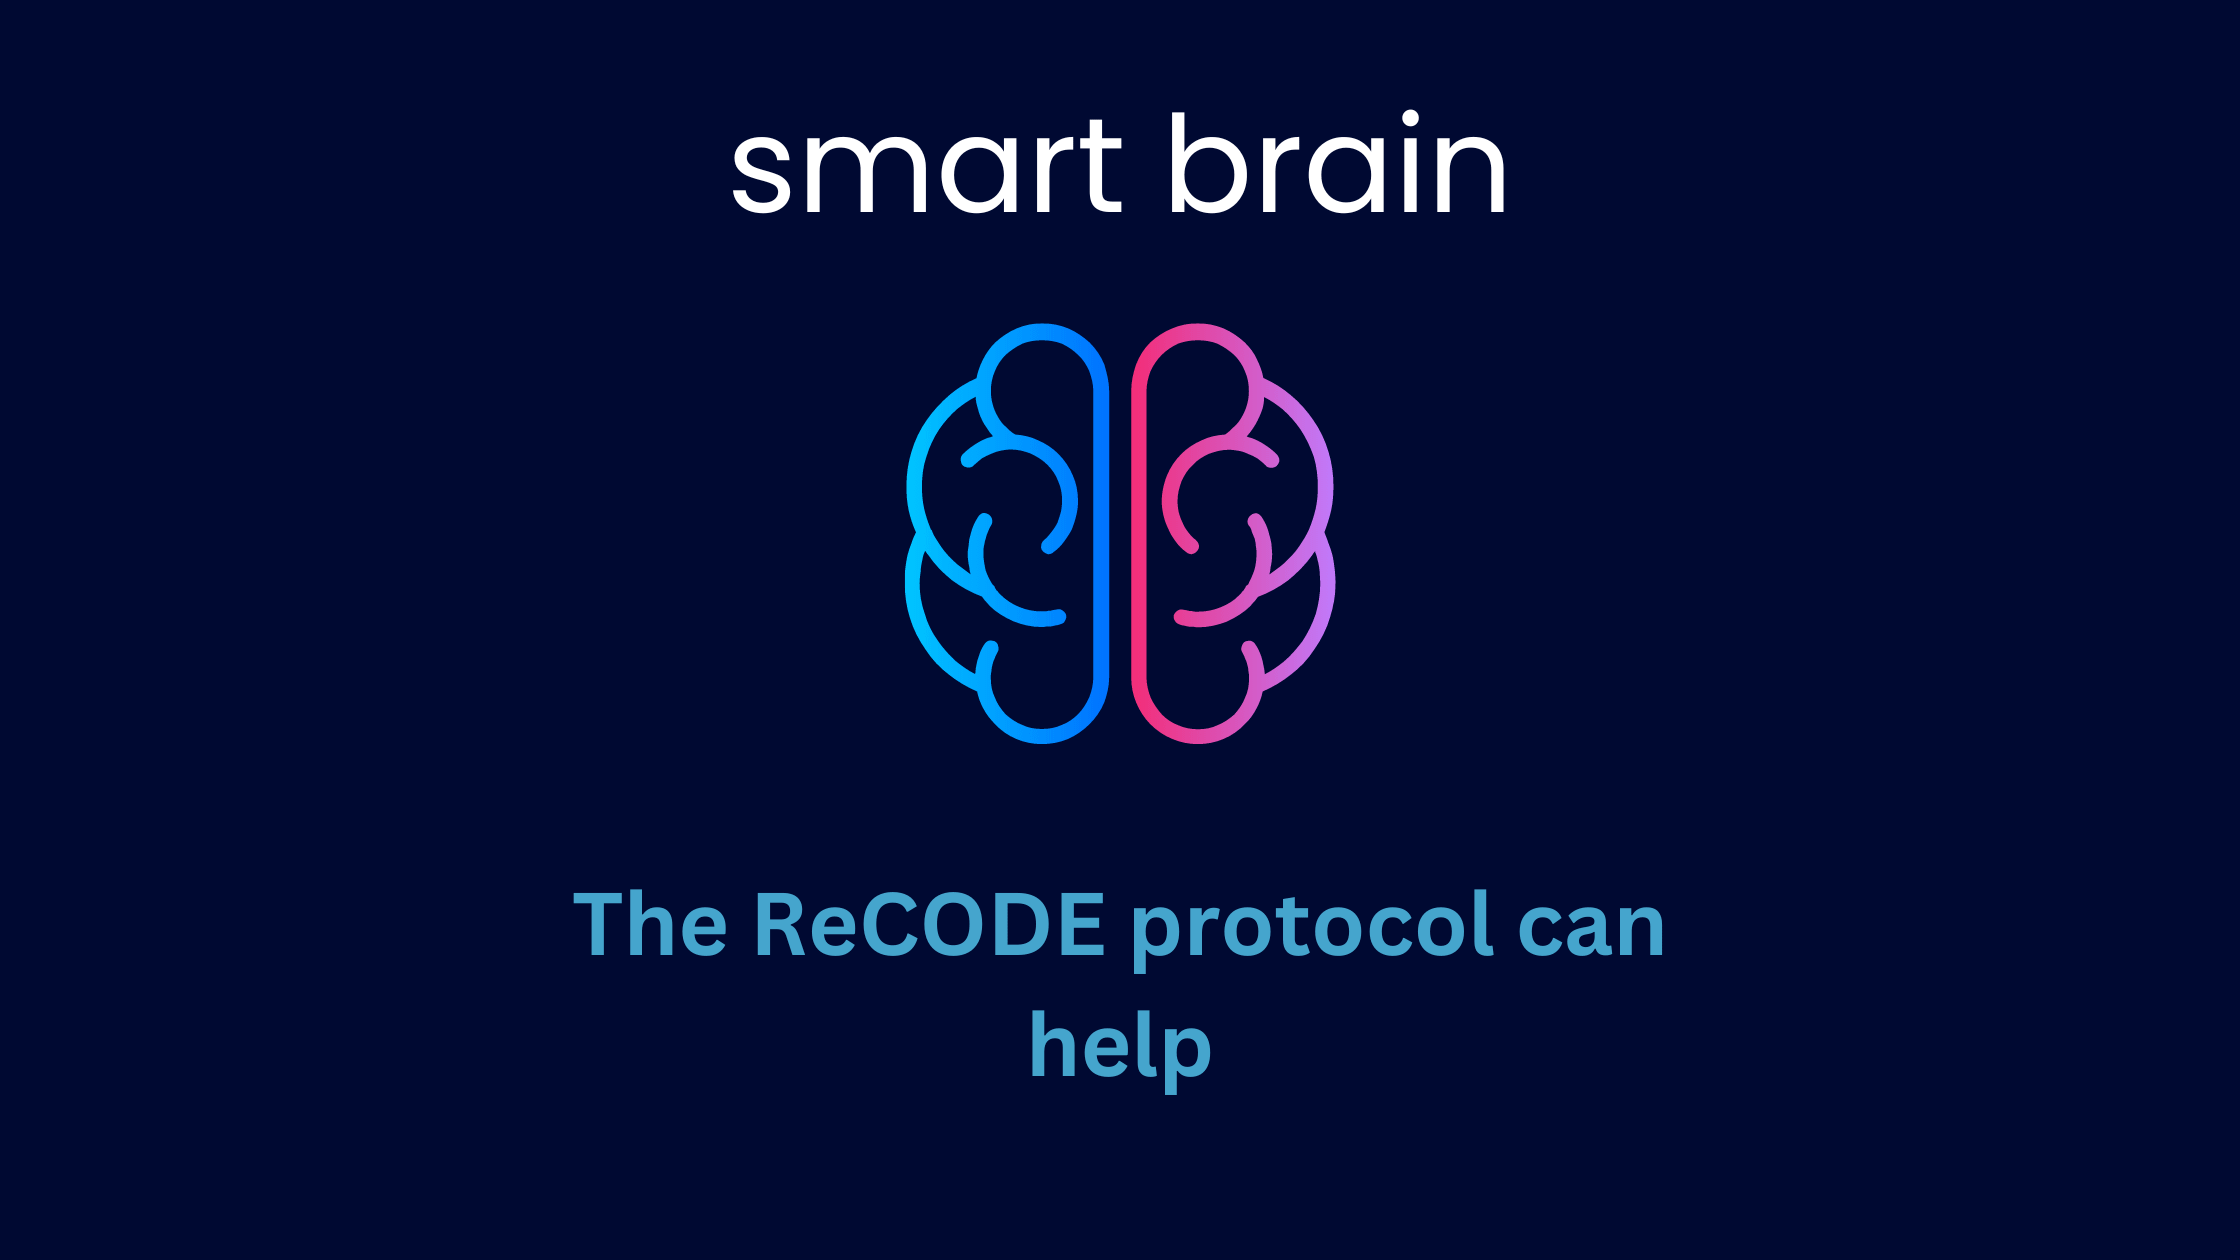 THE ReCODE PROTOCOL